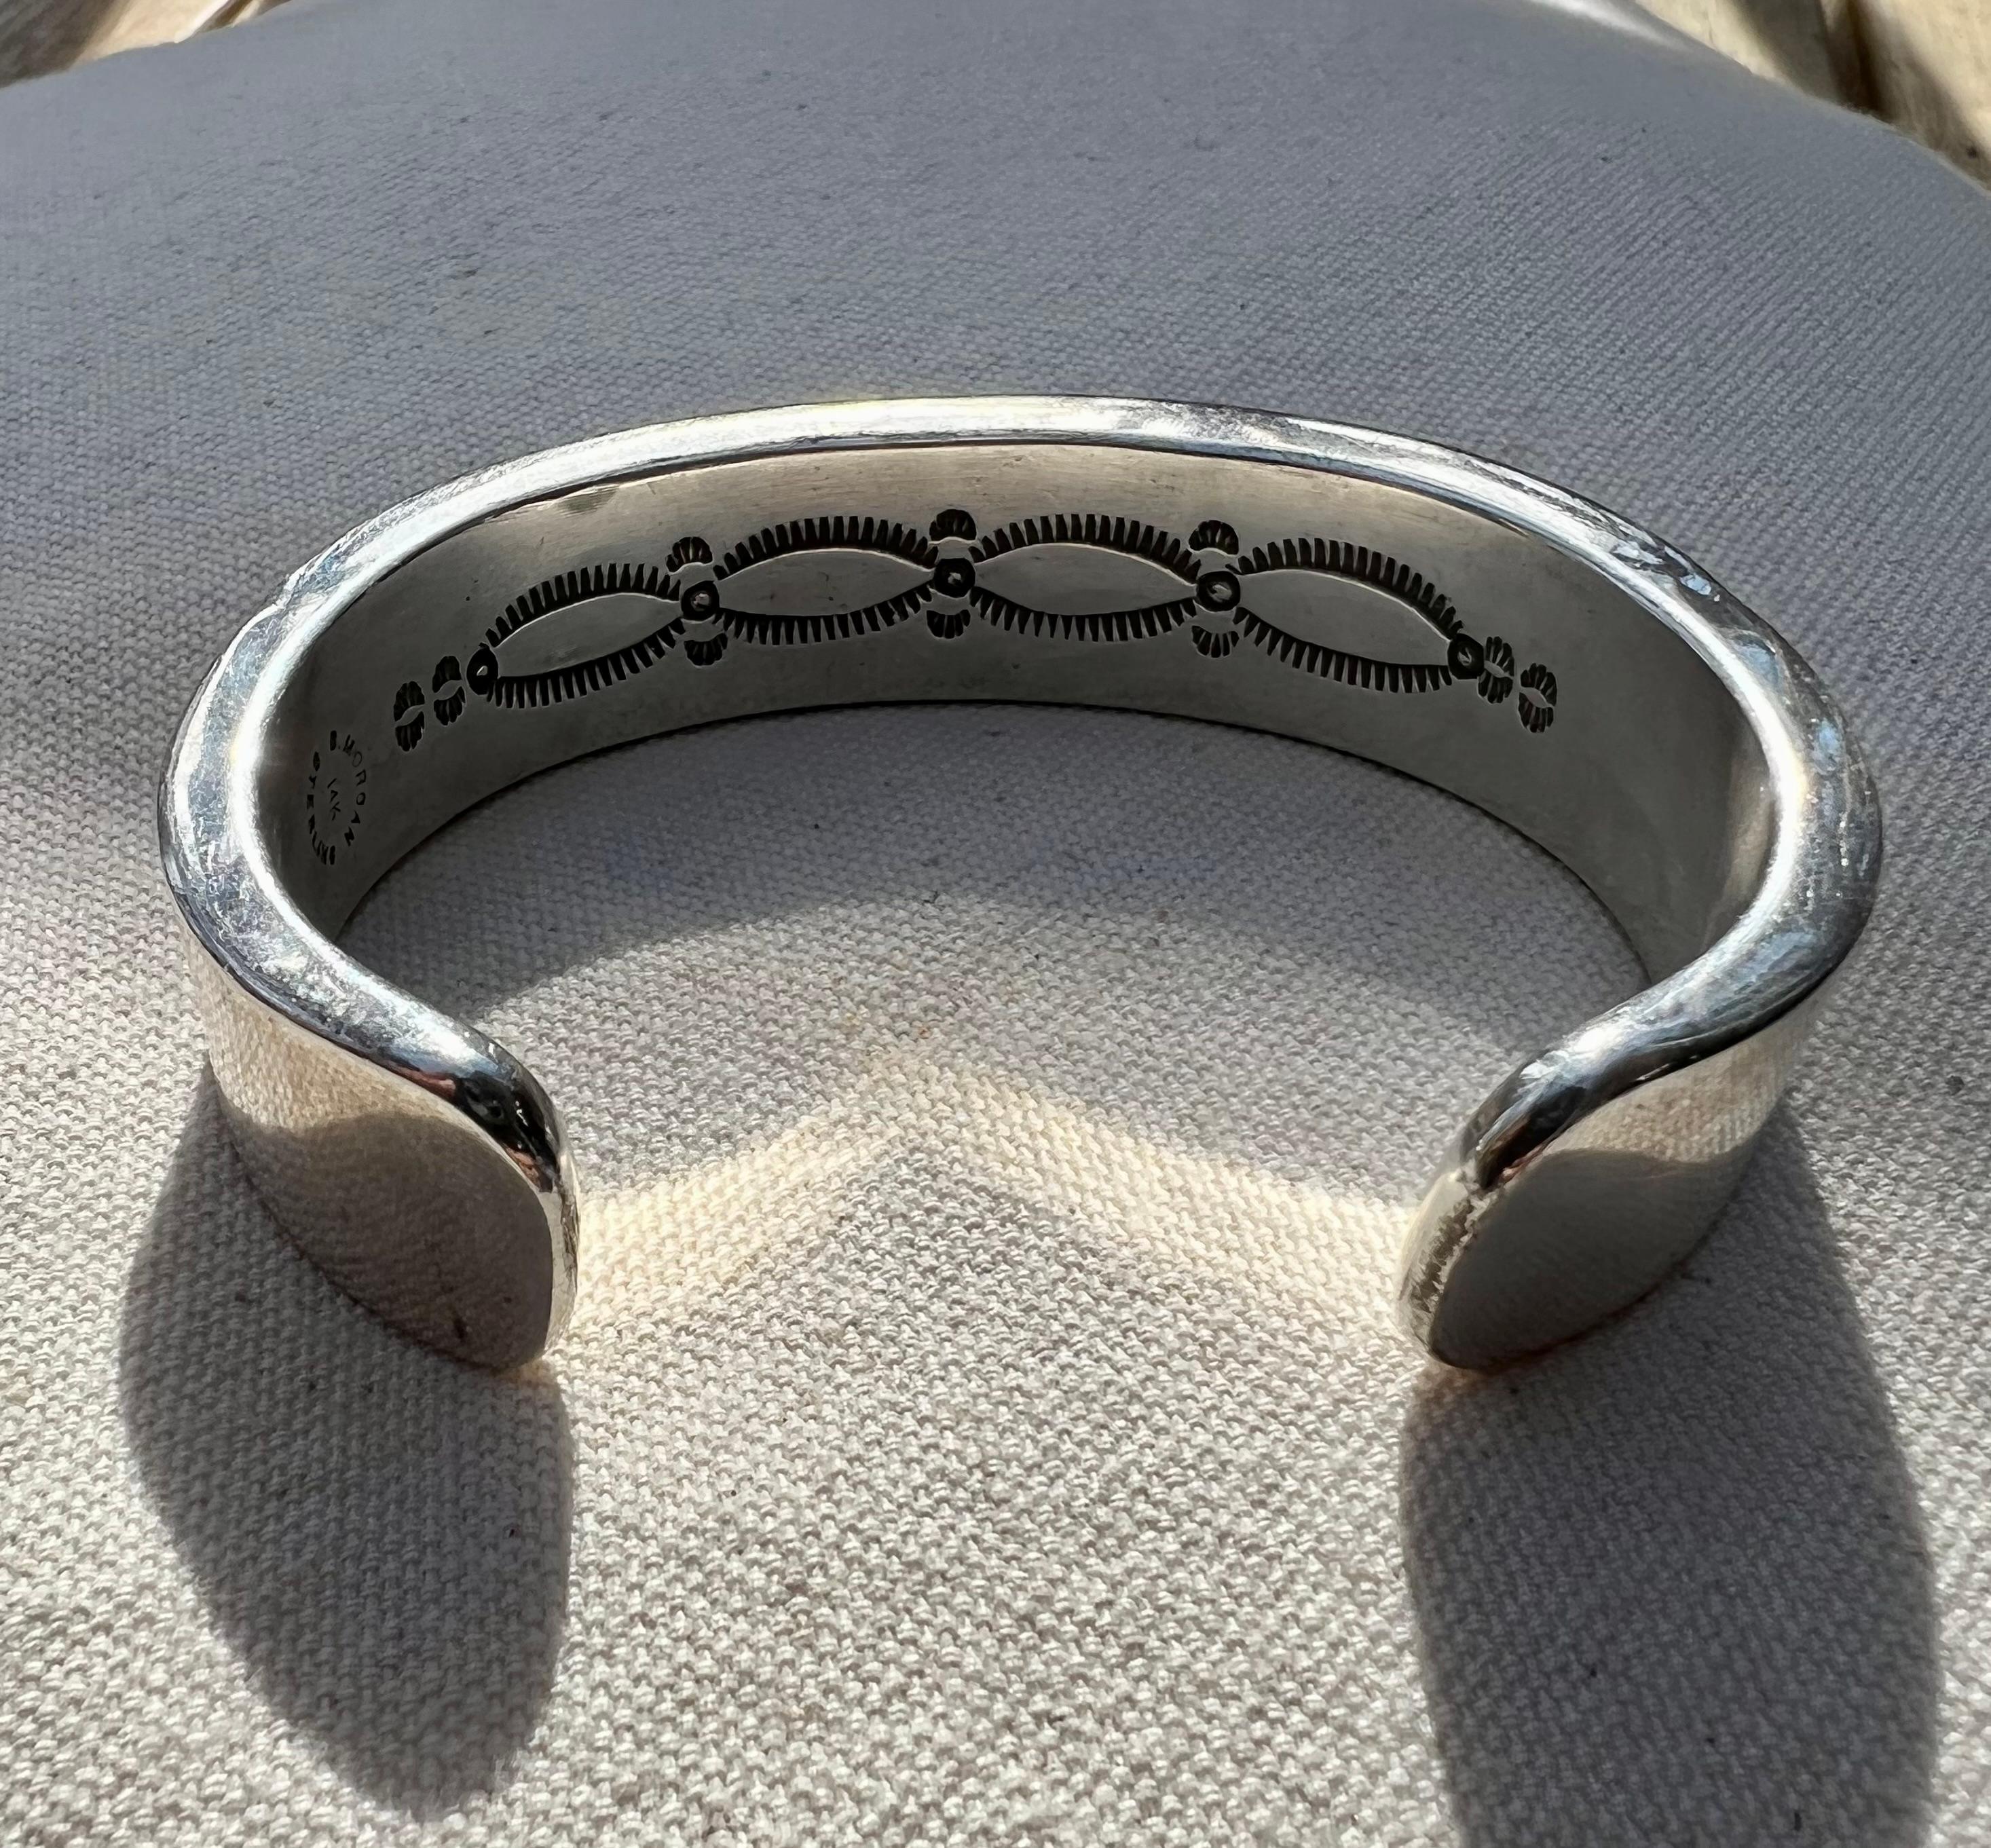 Sterling Silver and 14 Karat Yellow Bruce Morgan cuff bracelet (stamped B. Morgan, 14K, Sterling) set with three Old Mine Cut diamonds, approximately 1.15 carat total weight with matching M/N/O color and SI2-I1 clarity.  The bracelet measures 17.5mm